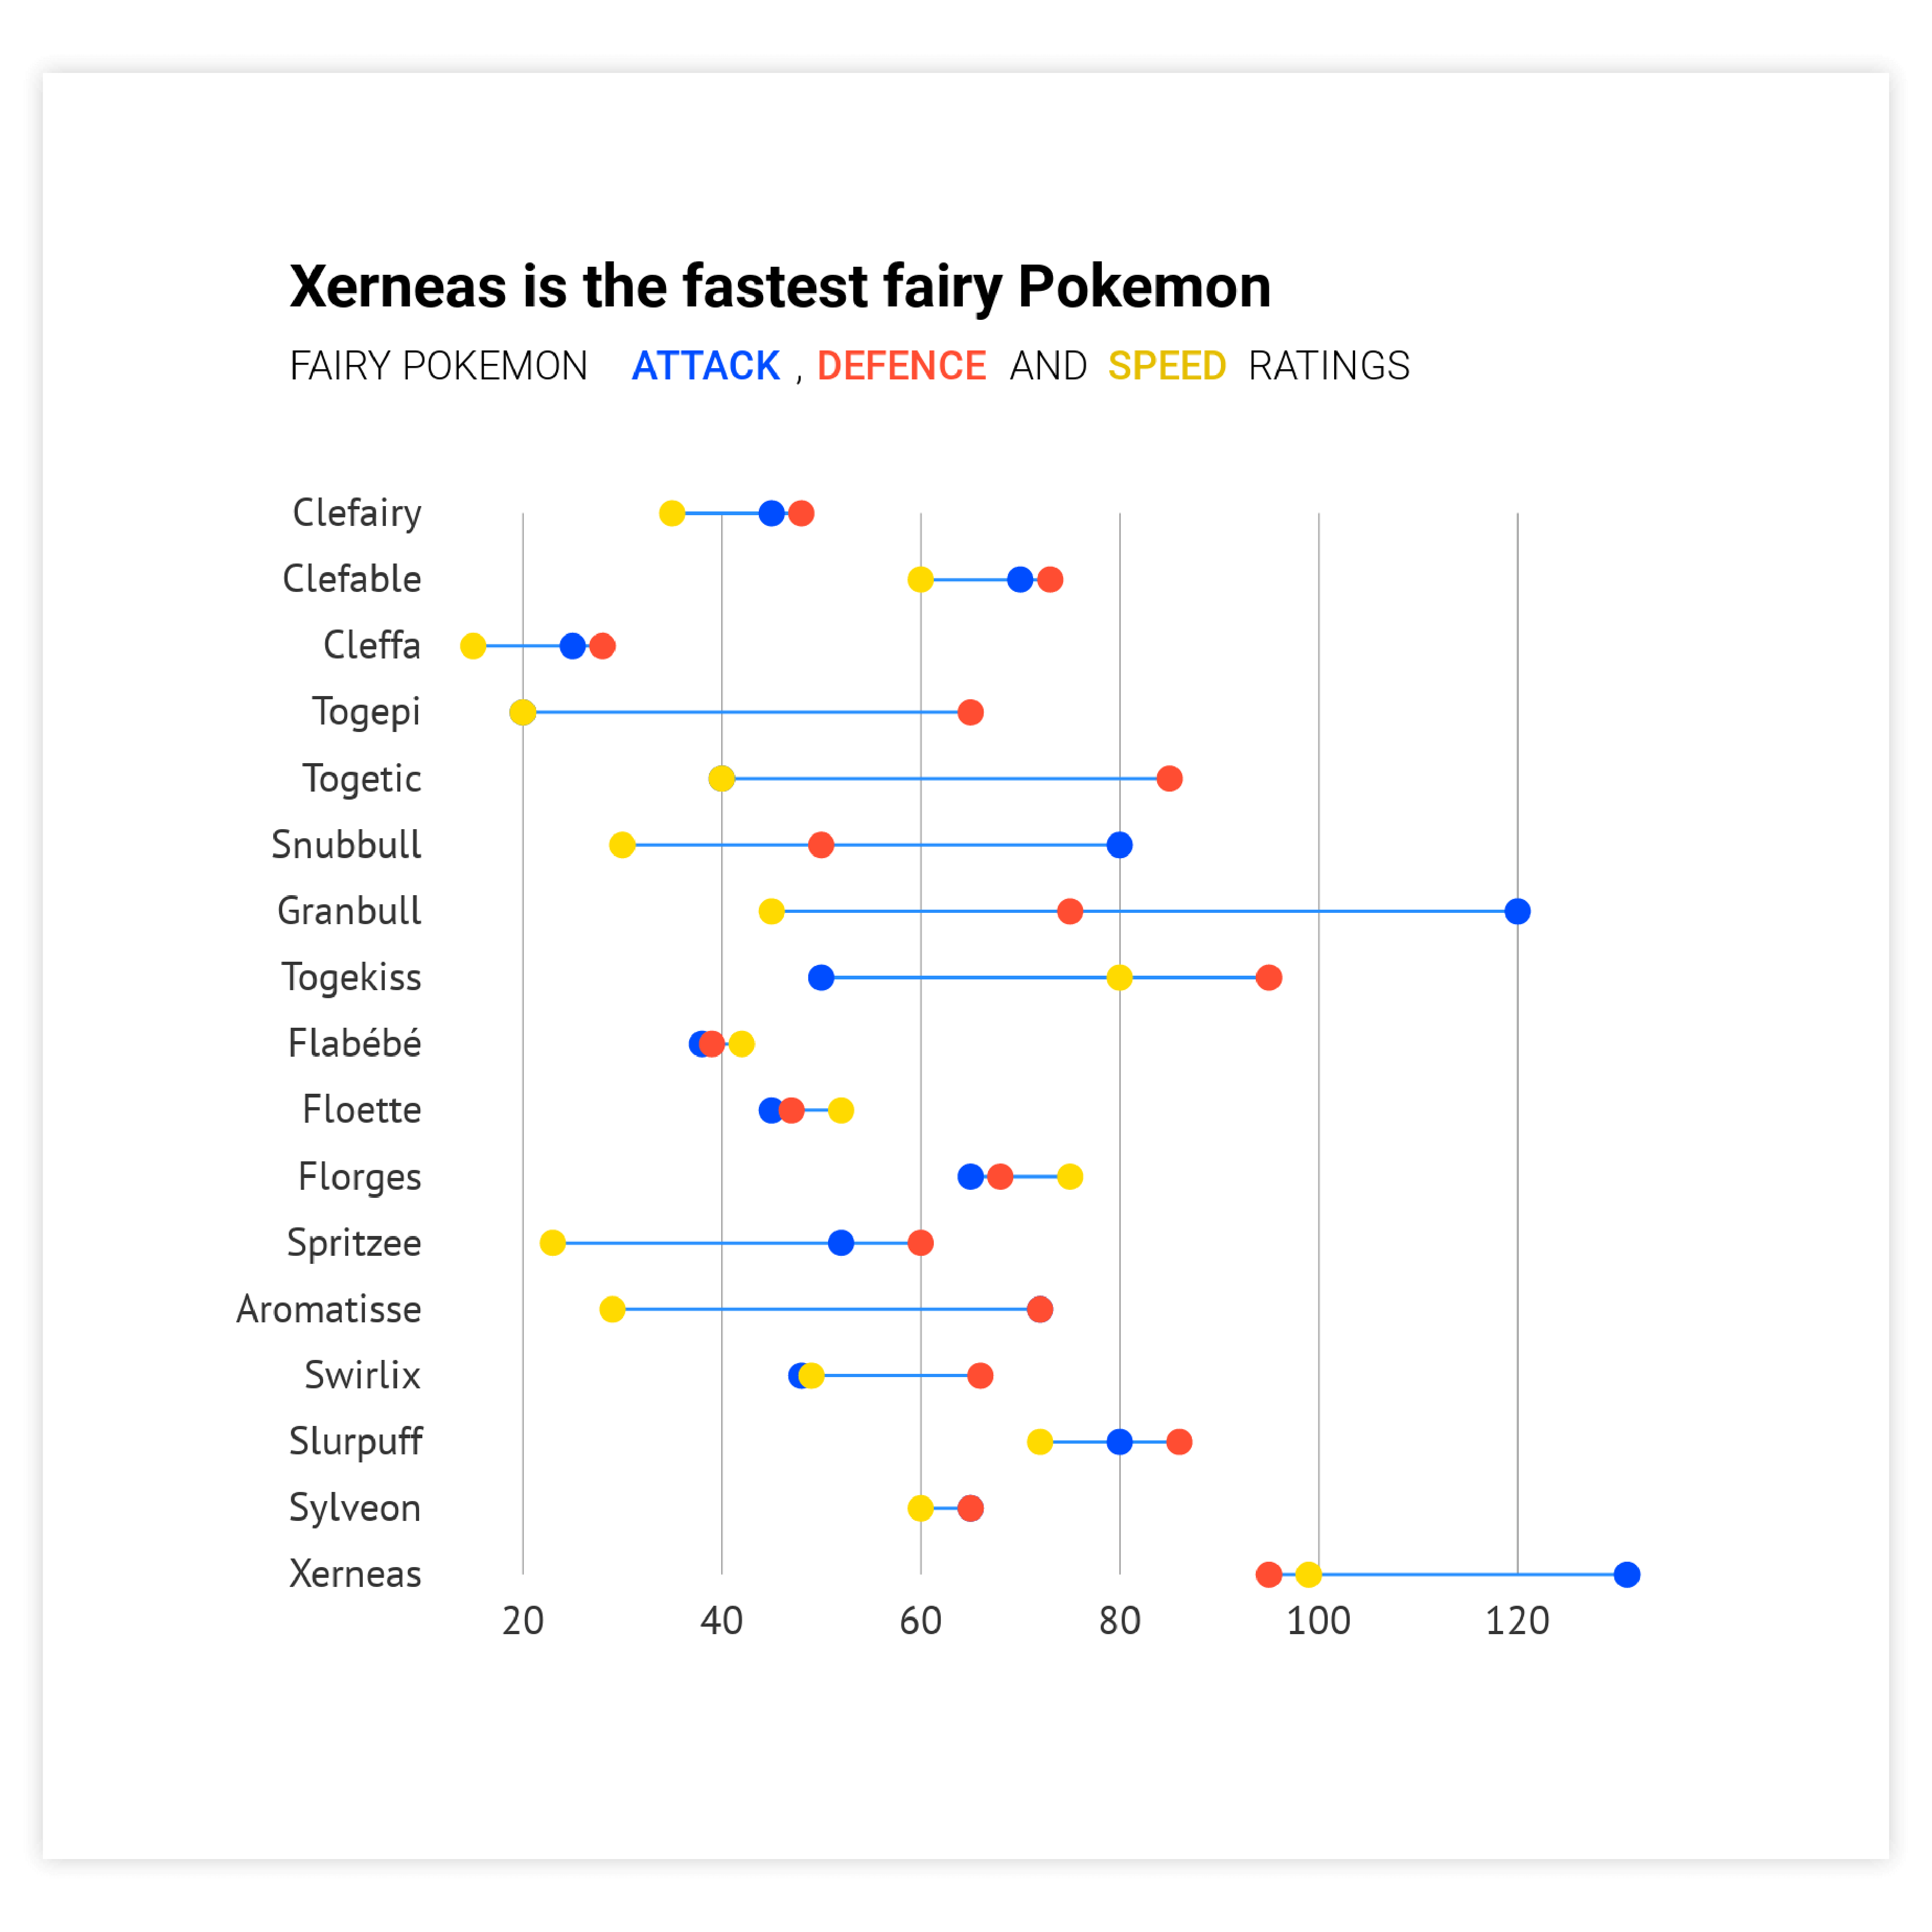 Sample of dot plots - get inspired and use this sample to design your own dot plot!